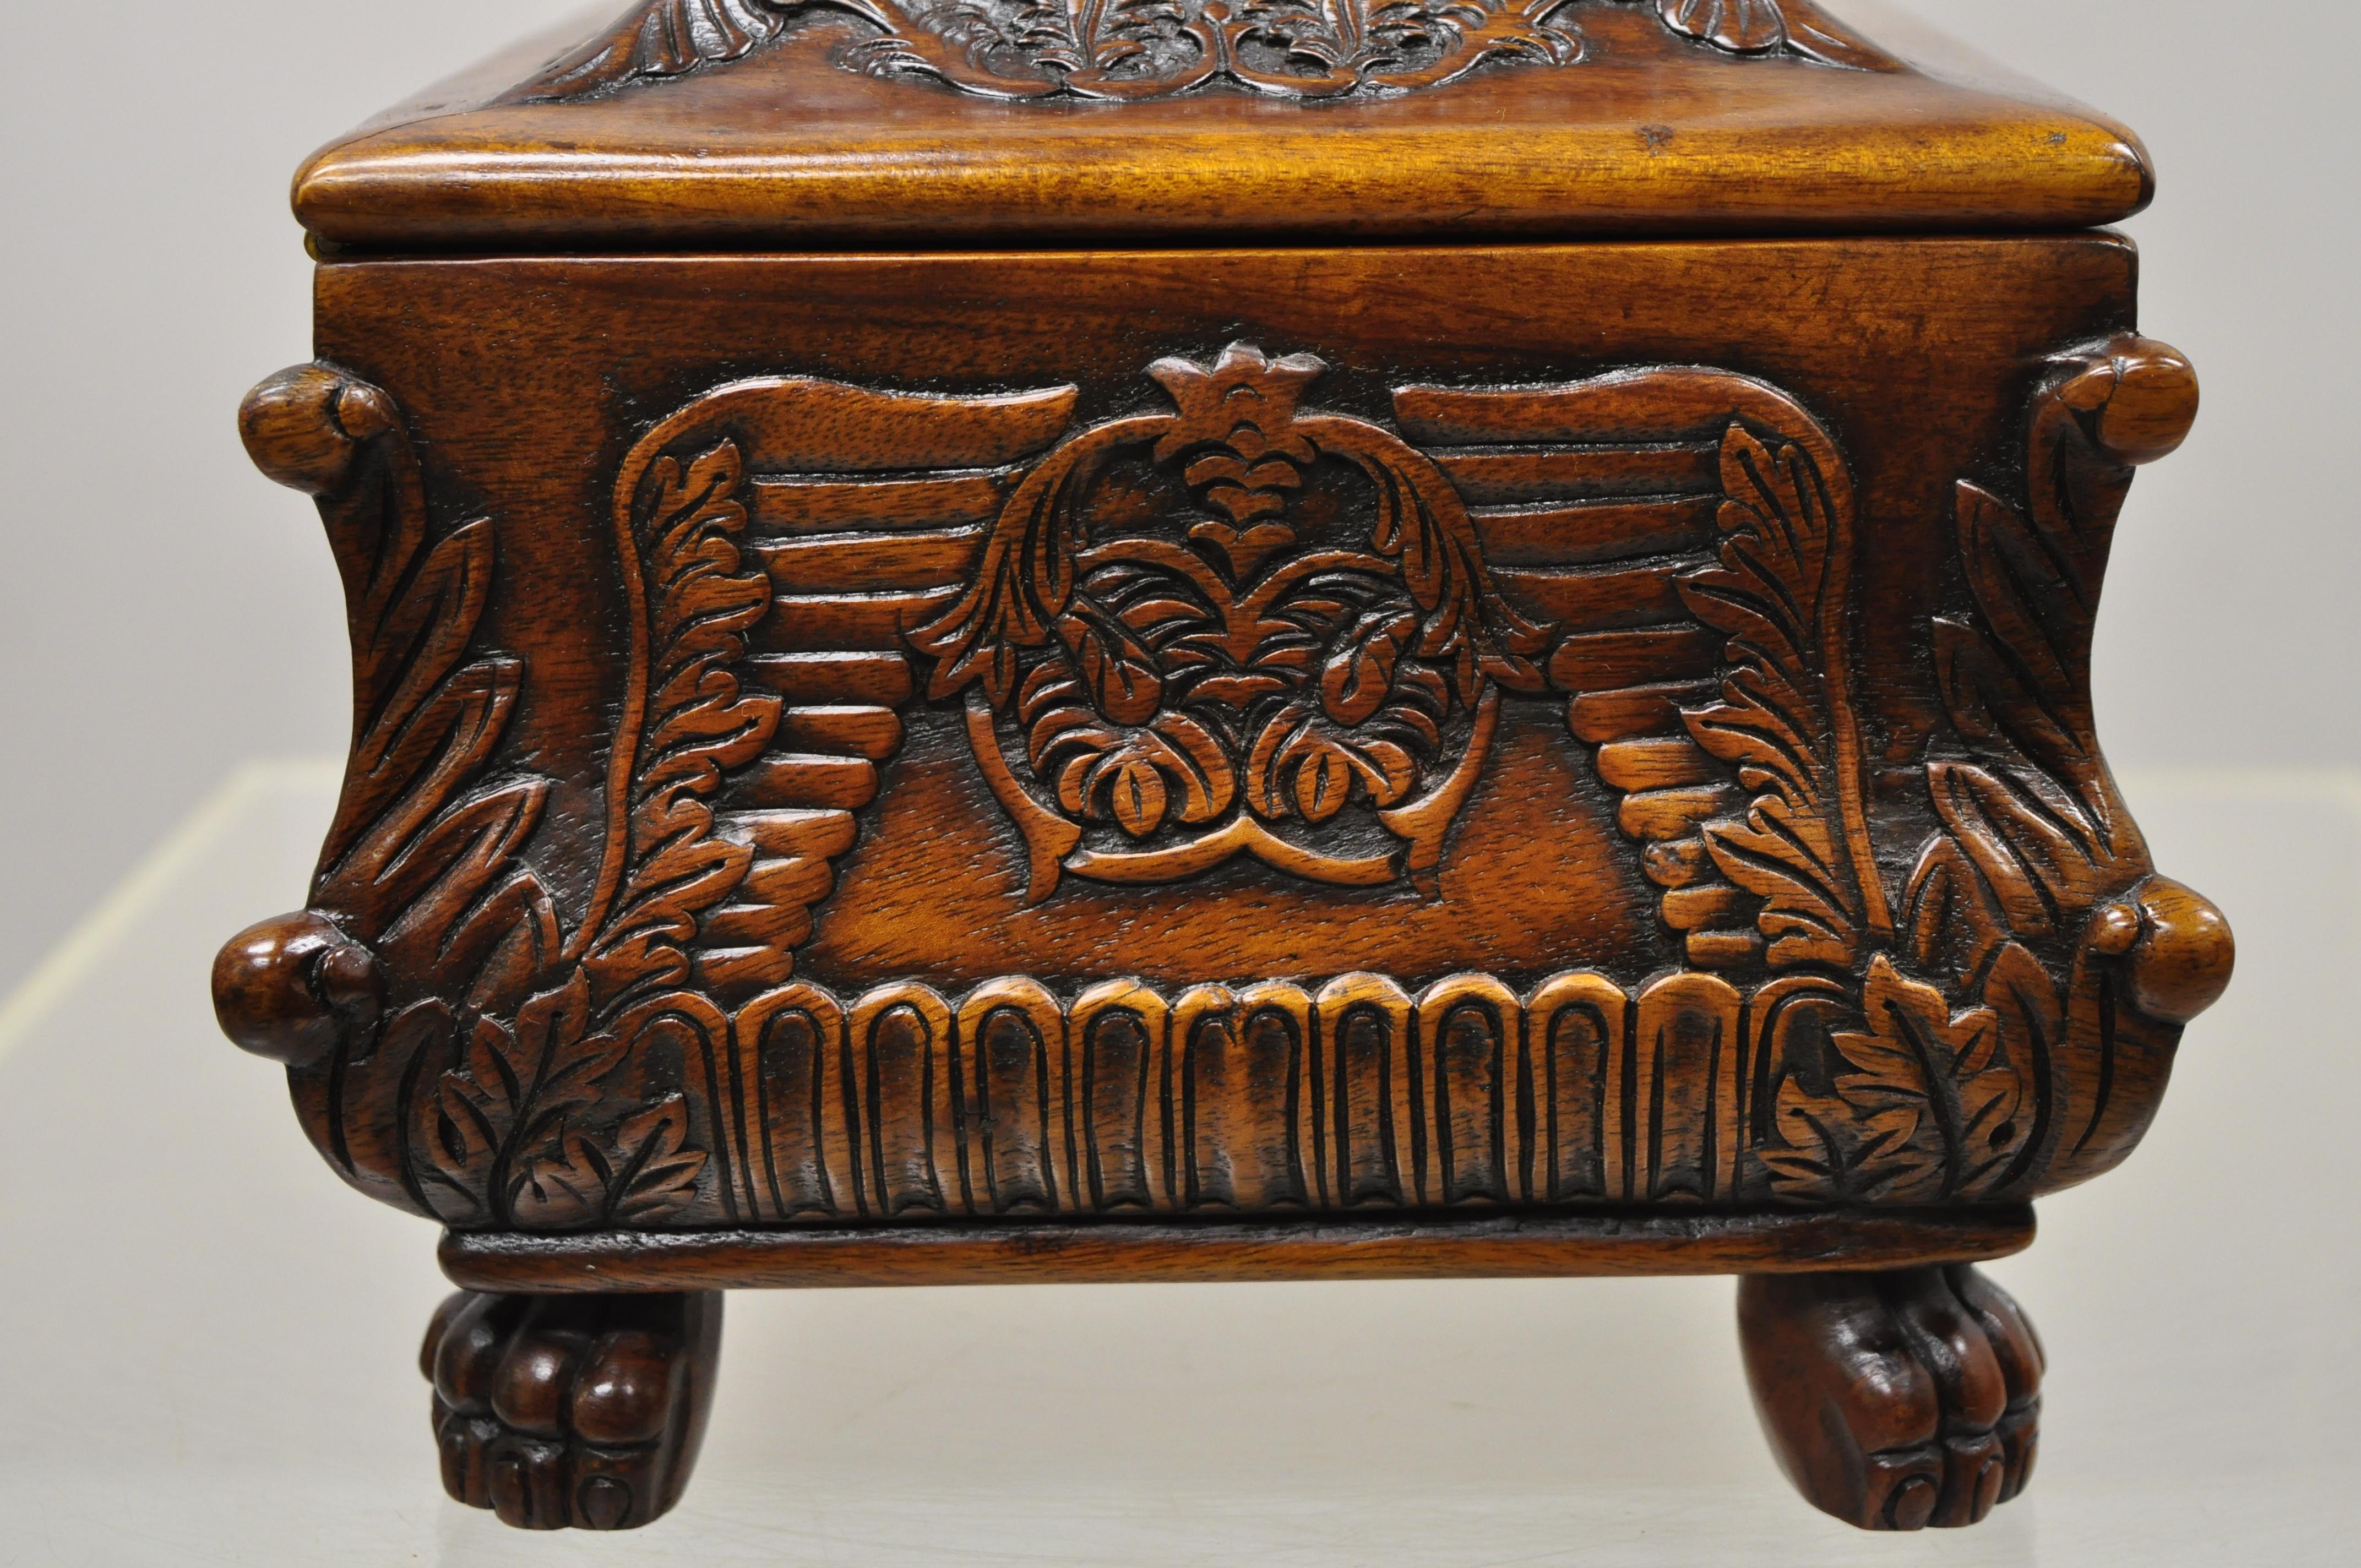 20th Century French Empire Rococo Style Carved Mahogany Paw Feet Jewelry Vanity Trinket Box For Sale